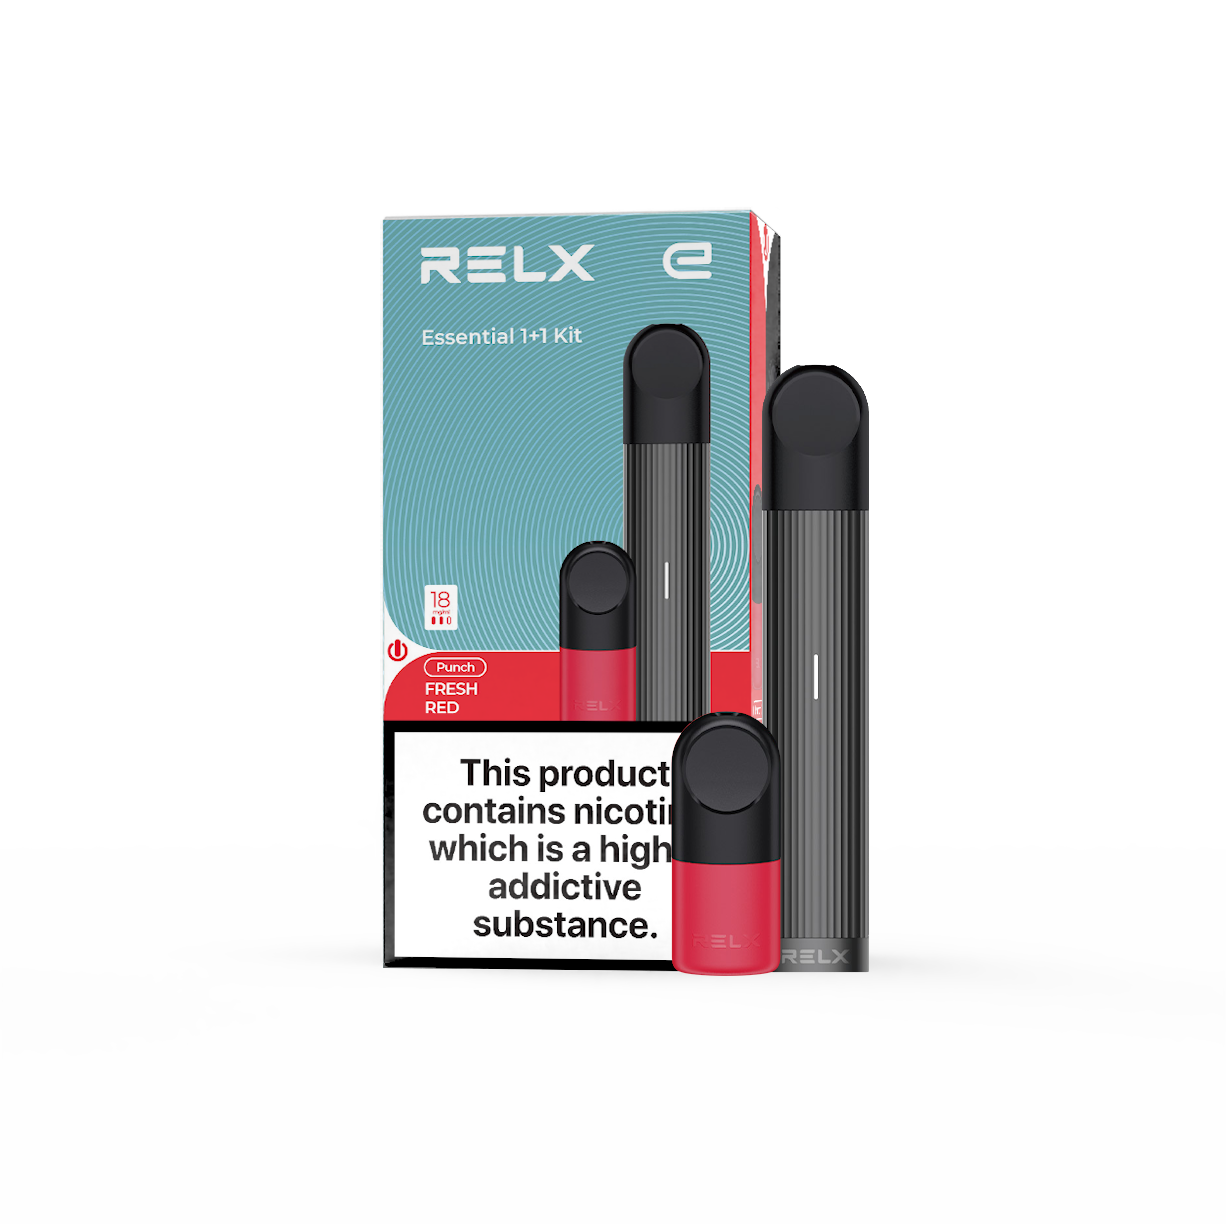 Relx International launches new starter kit for Essential device